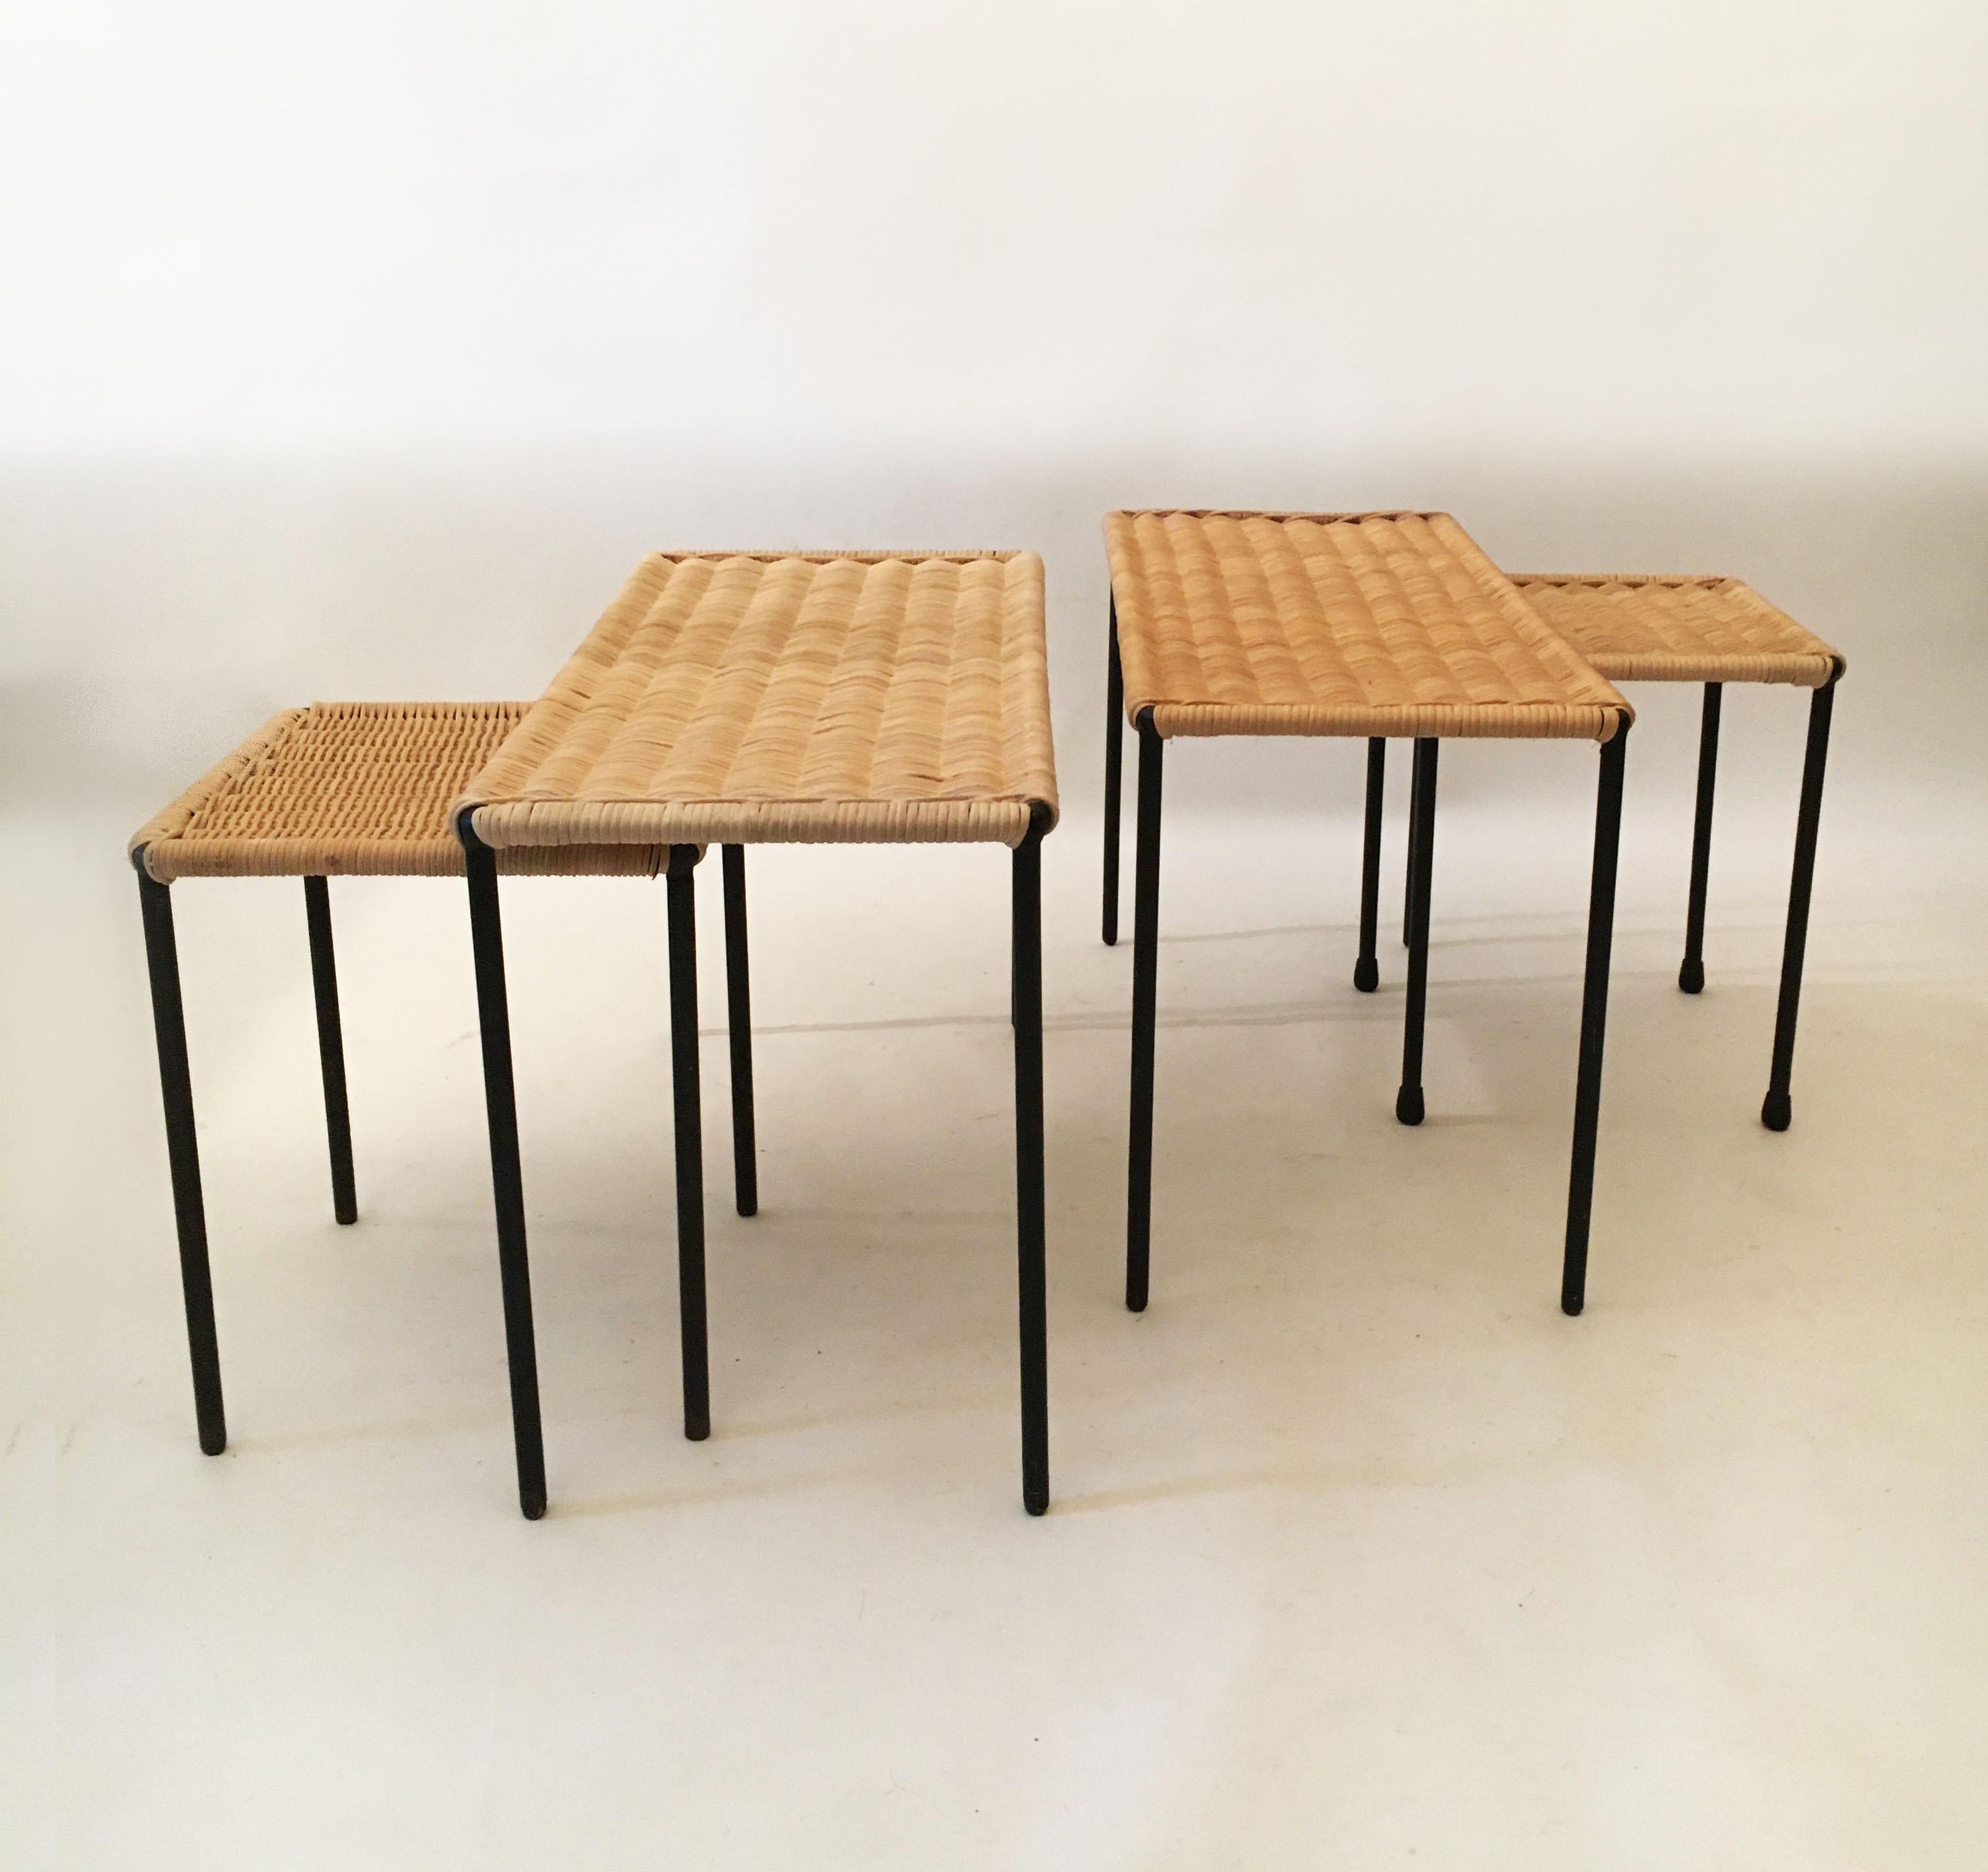 Mid-Century Modern Carl Auböck II Woven Wicker Table Collection, Set of Four, circa 1950